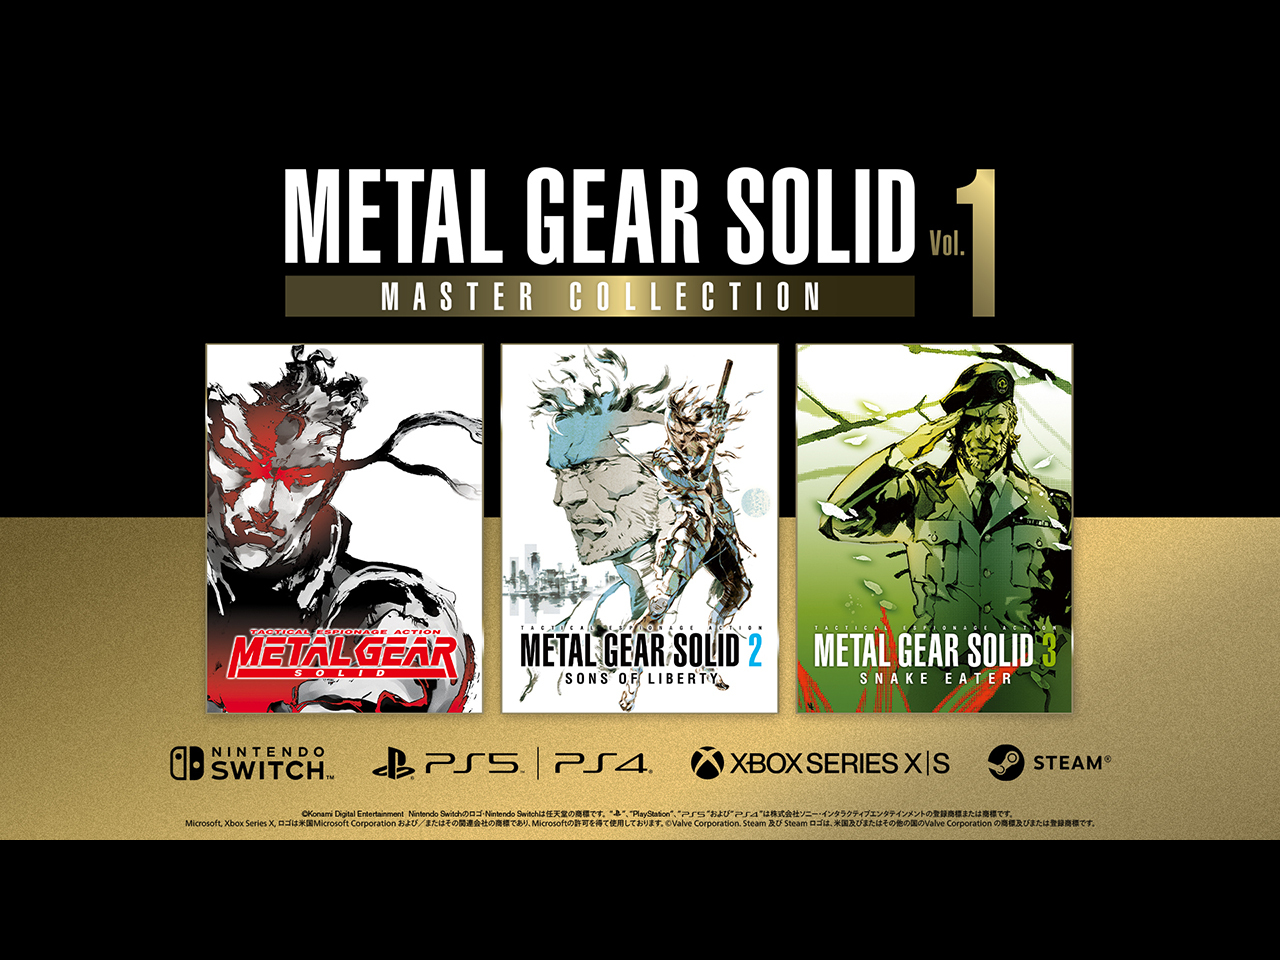 KONAMI、「METAL GEAR SOLID: MASTER COLLECTION Vol.1」を発売 - CNET 